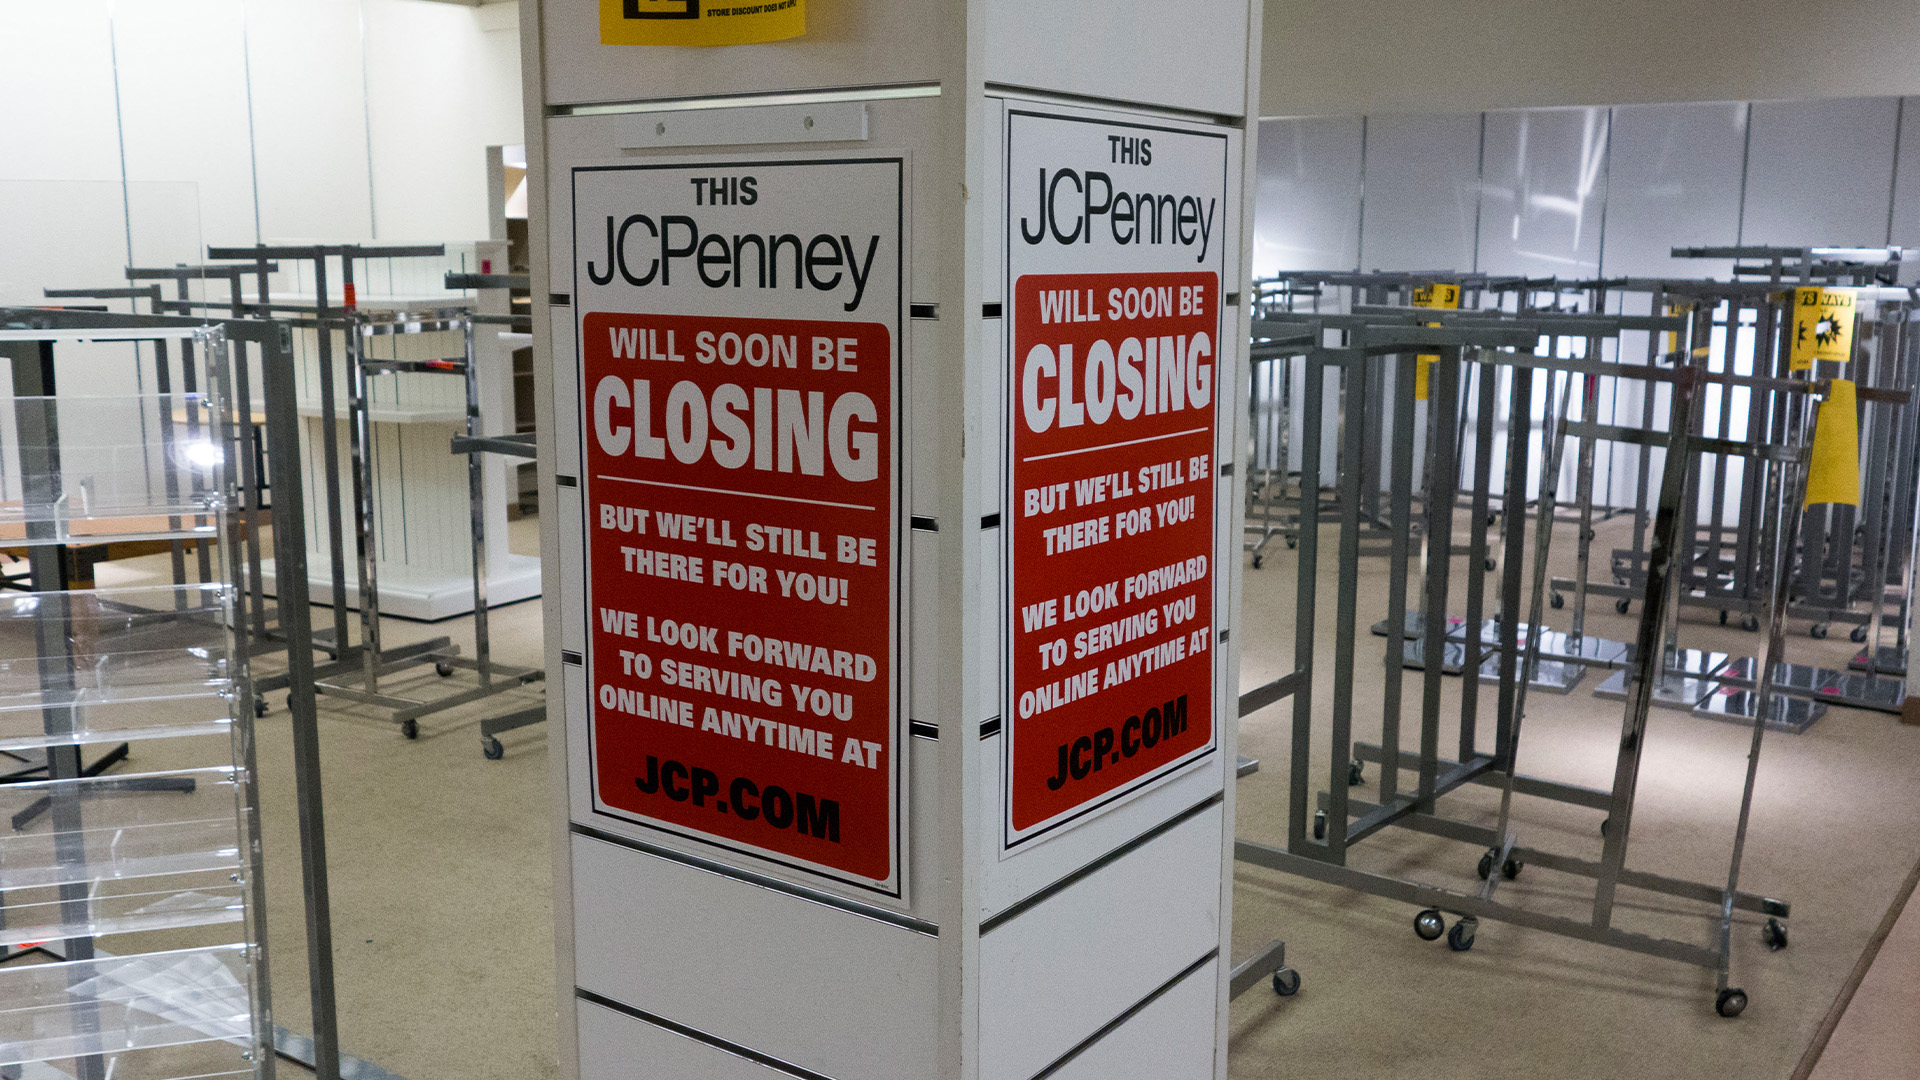 End of an era, cry JCPenney shoppers after customers left stunned by heartbreaking banner as chain to close 4 stores [Video]